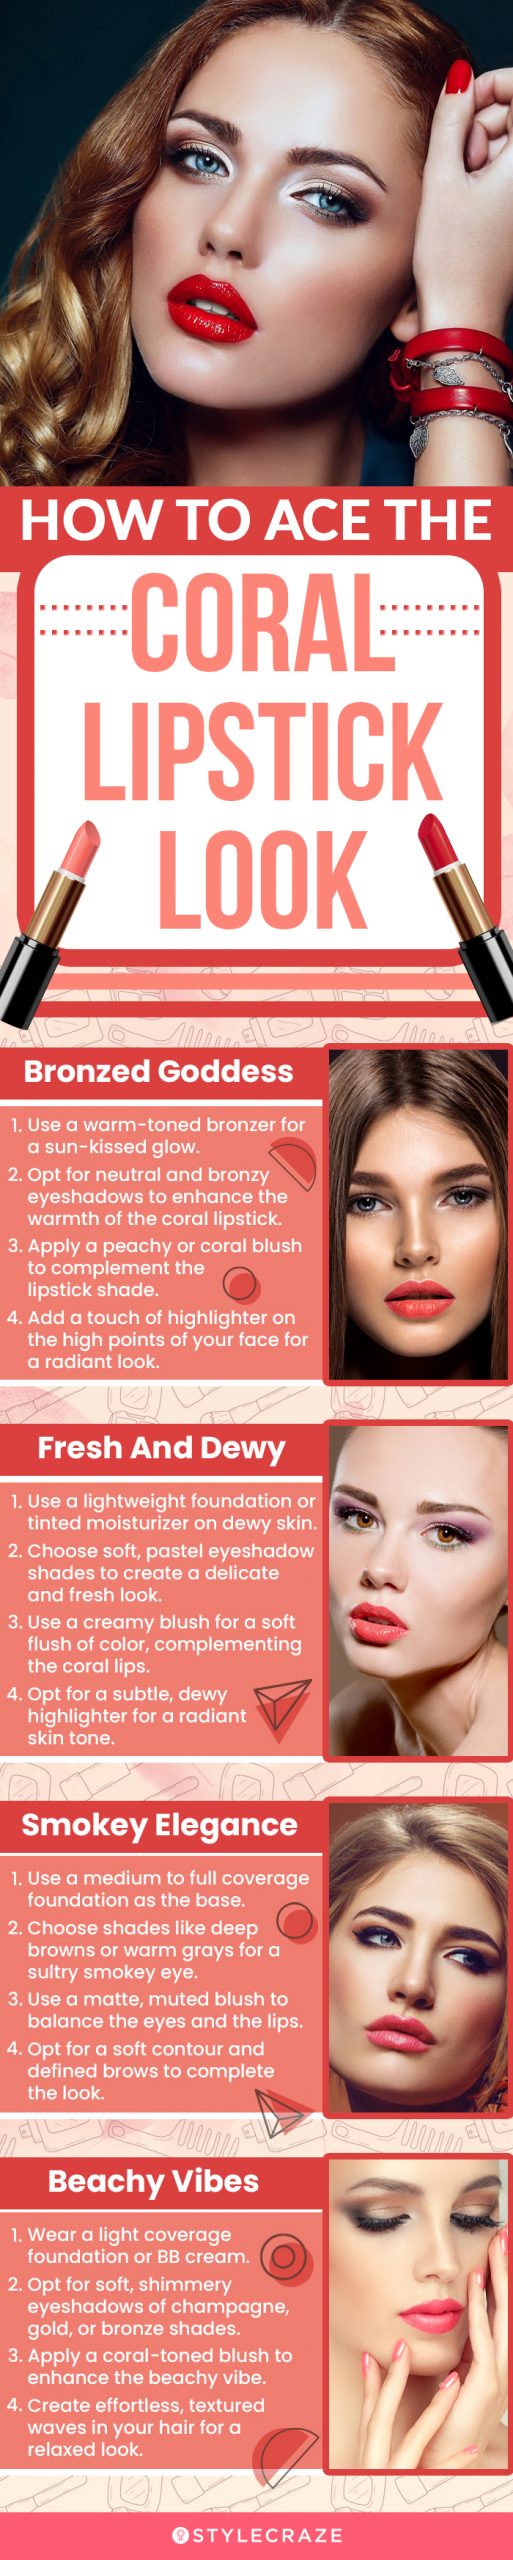 How To Ace The Coral Lipstick Look (infographic)